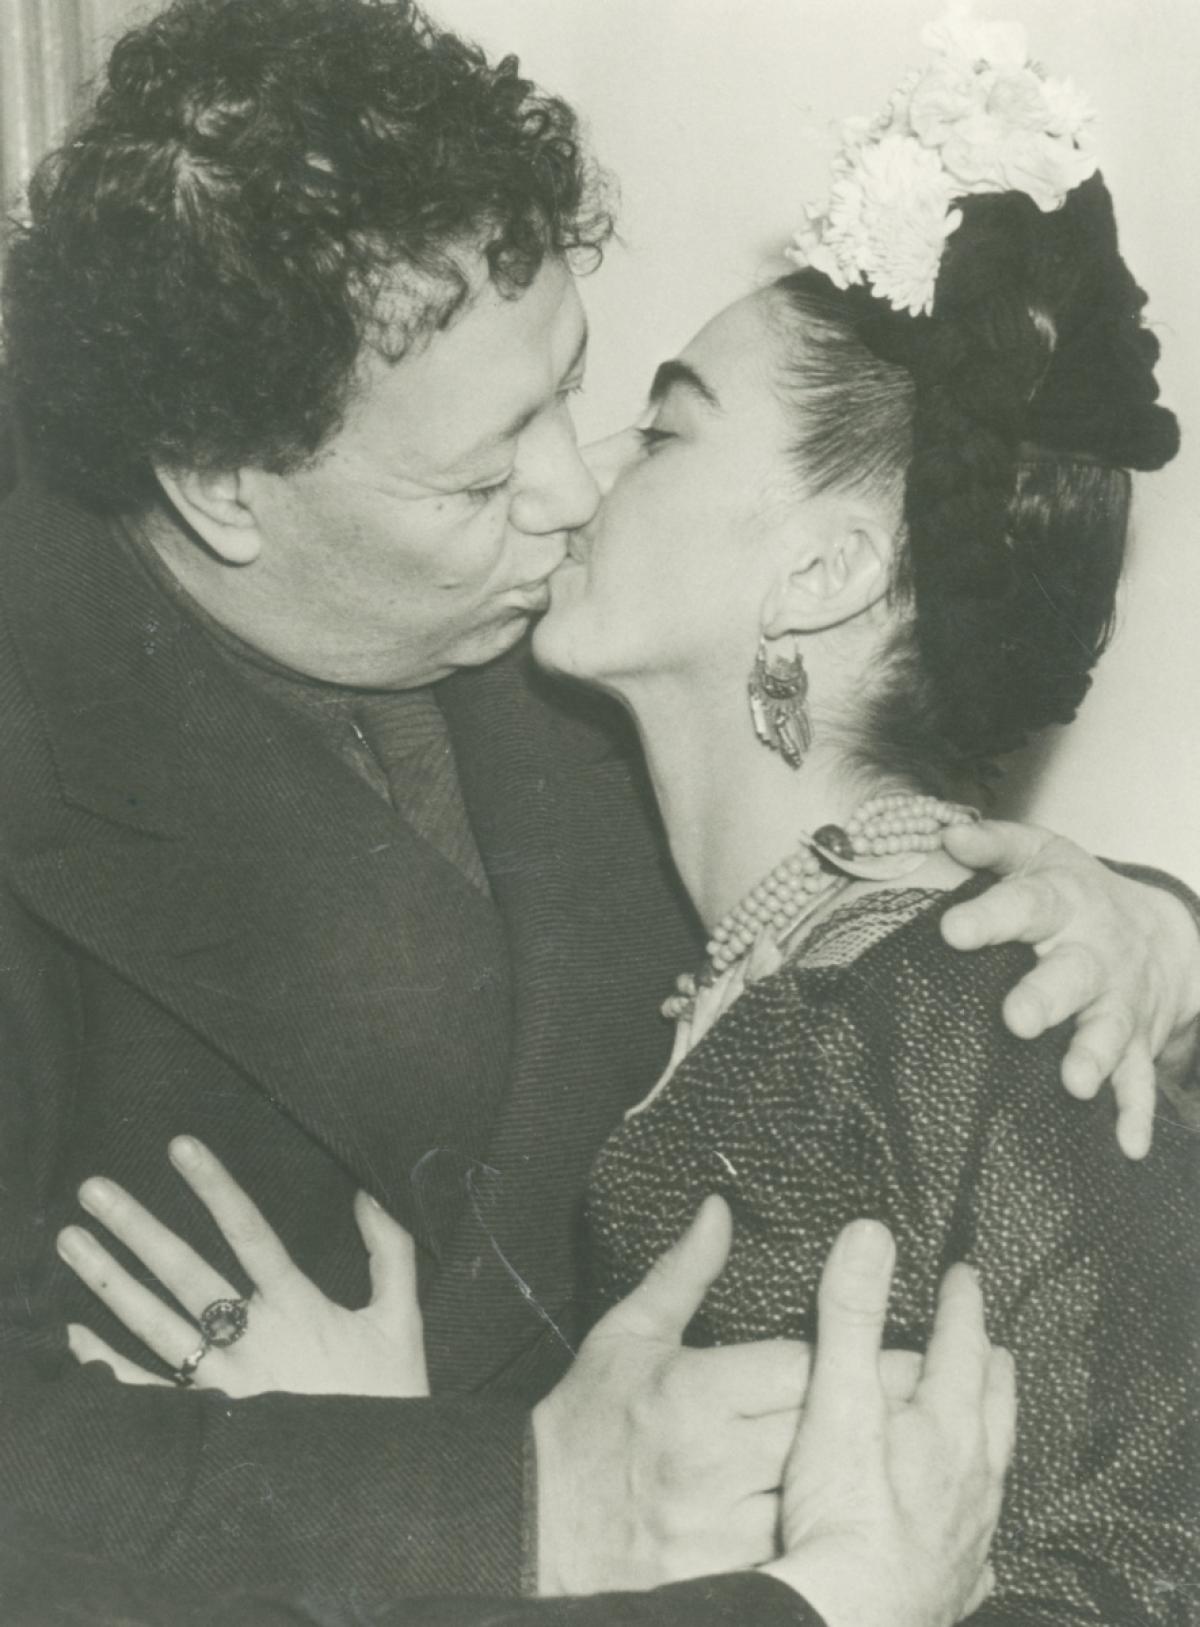 Unknown photographer, Frida and Diego kissing following their second wedding after signing their marriage certificate, San Francisco, 1940